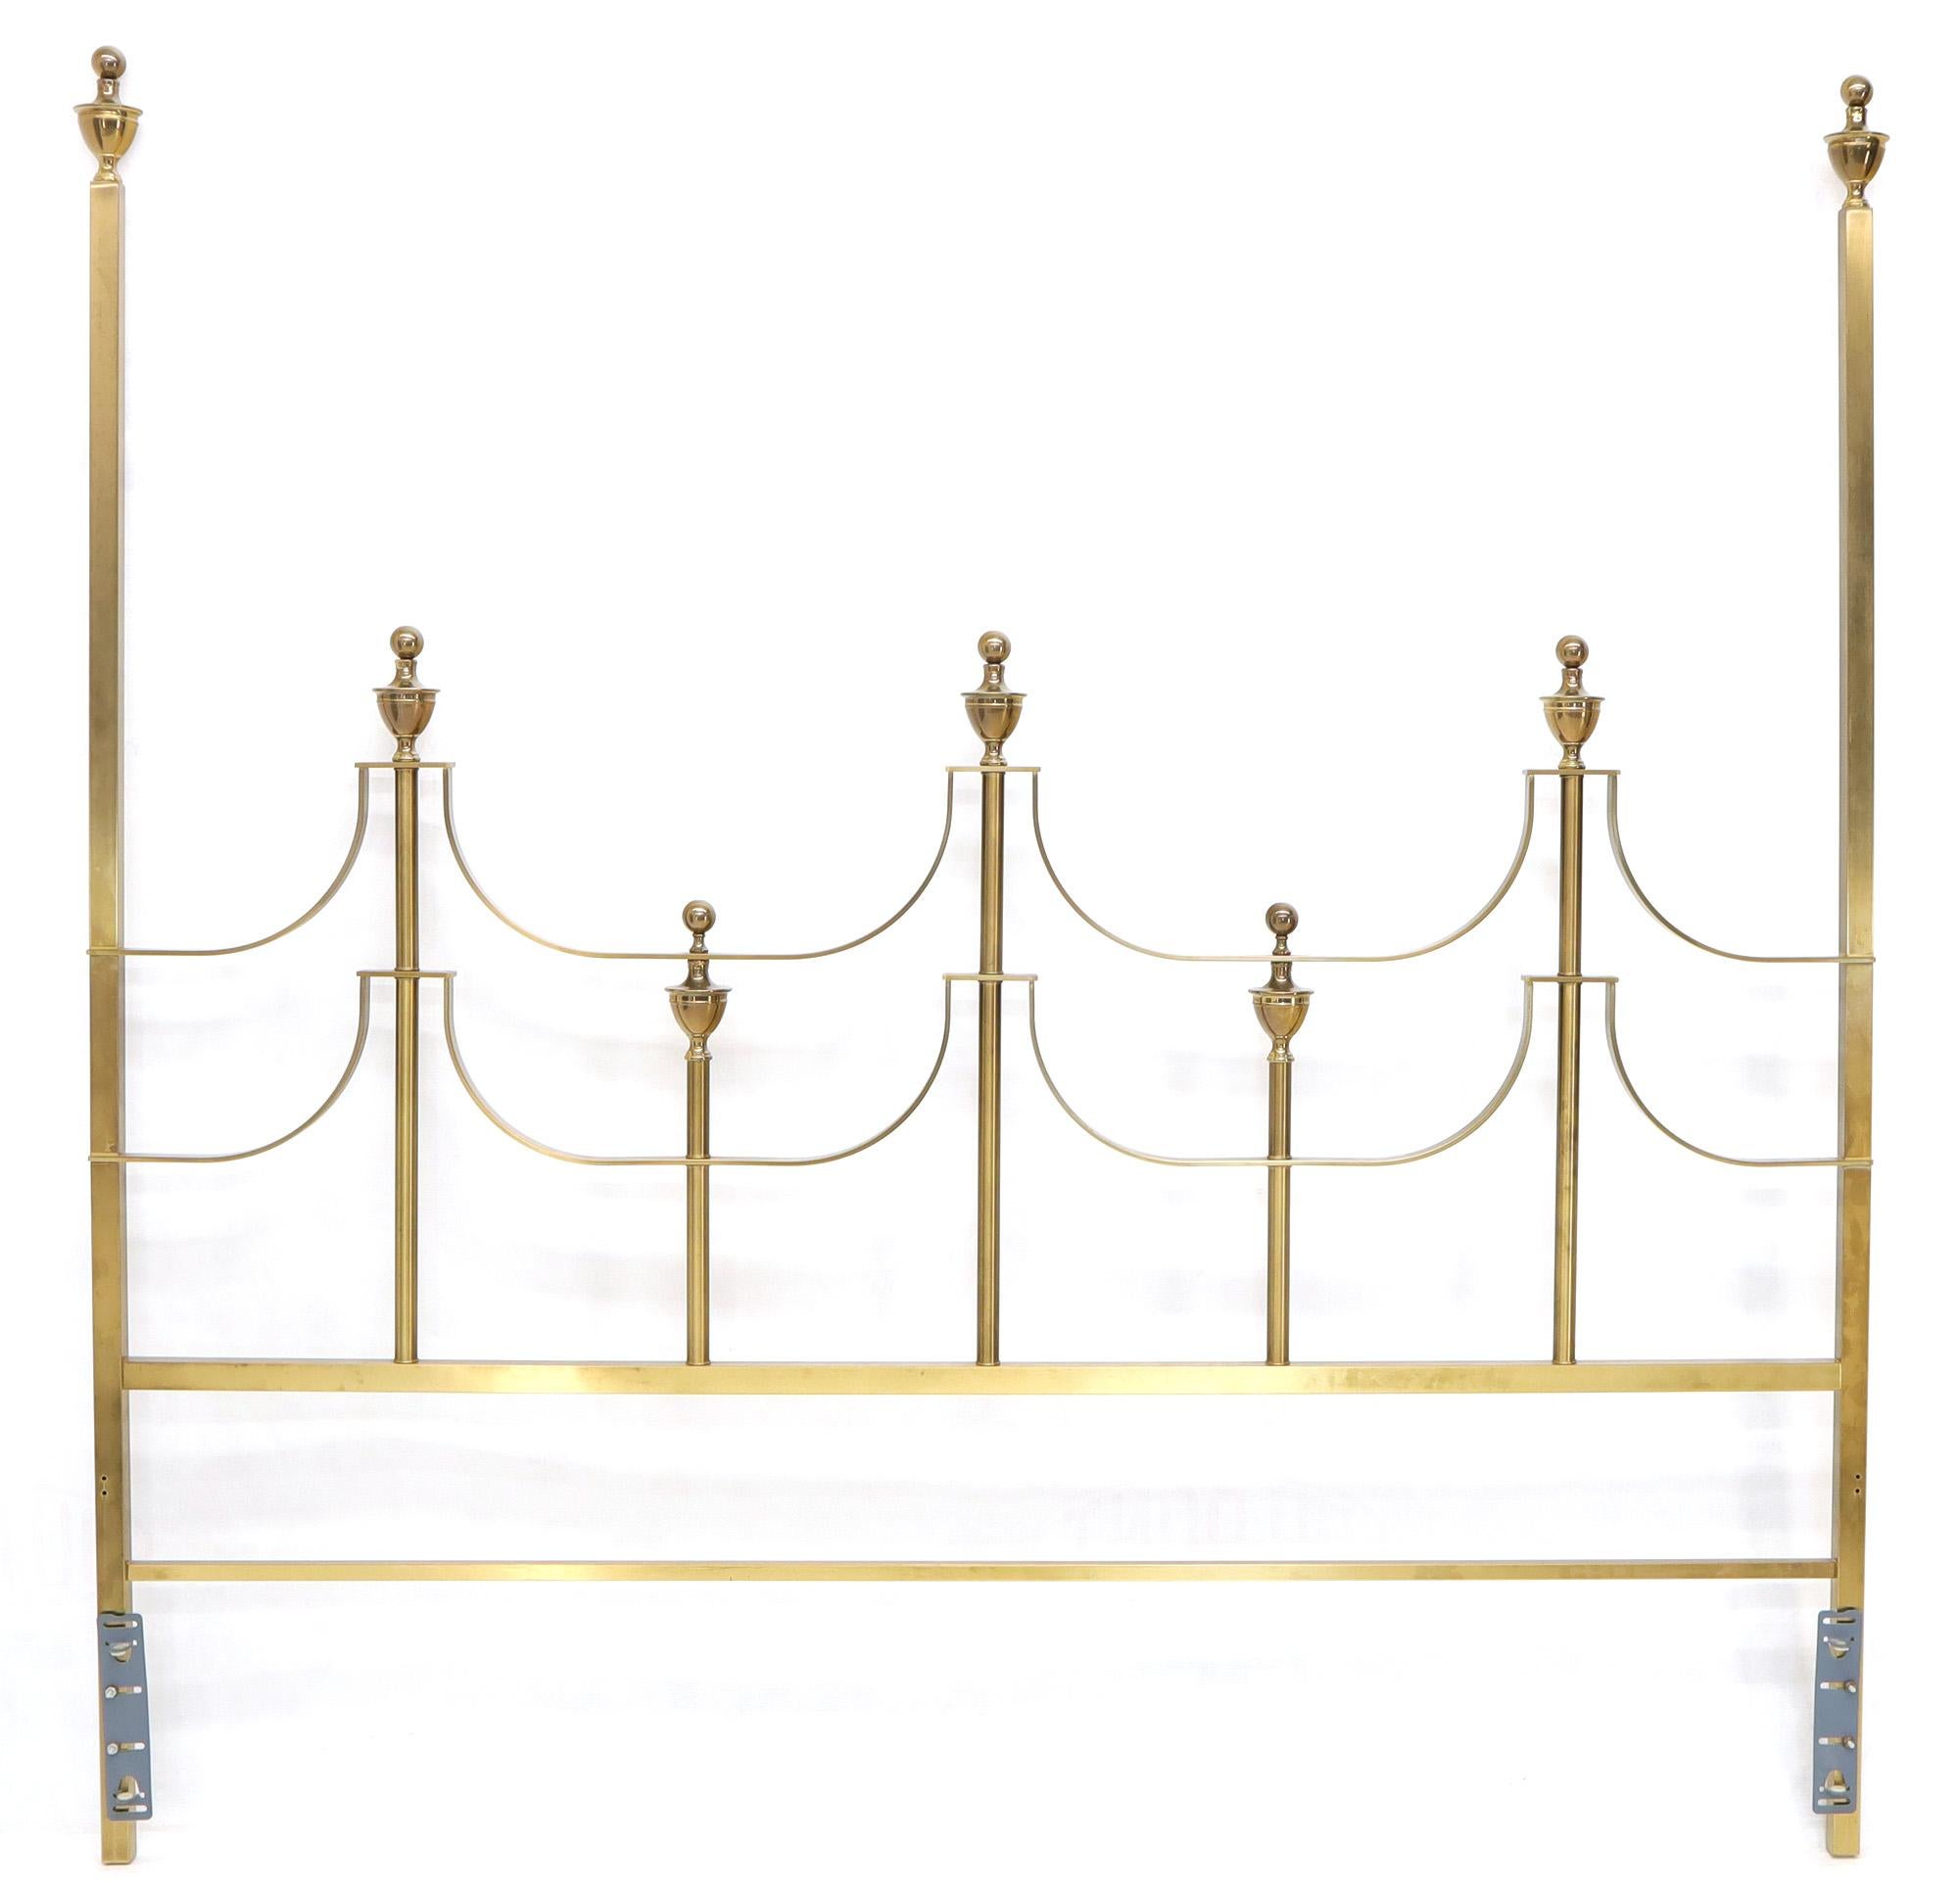 Mid-Century Modern solid brass headboard king bed by Mastercraft with cup shape finials.